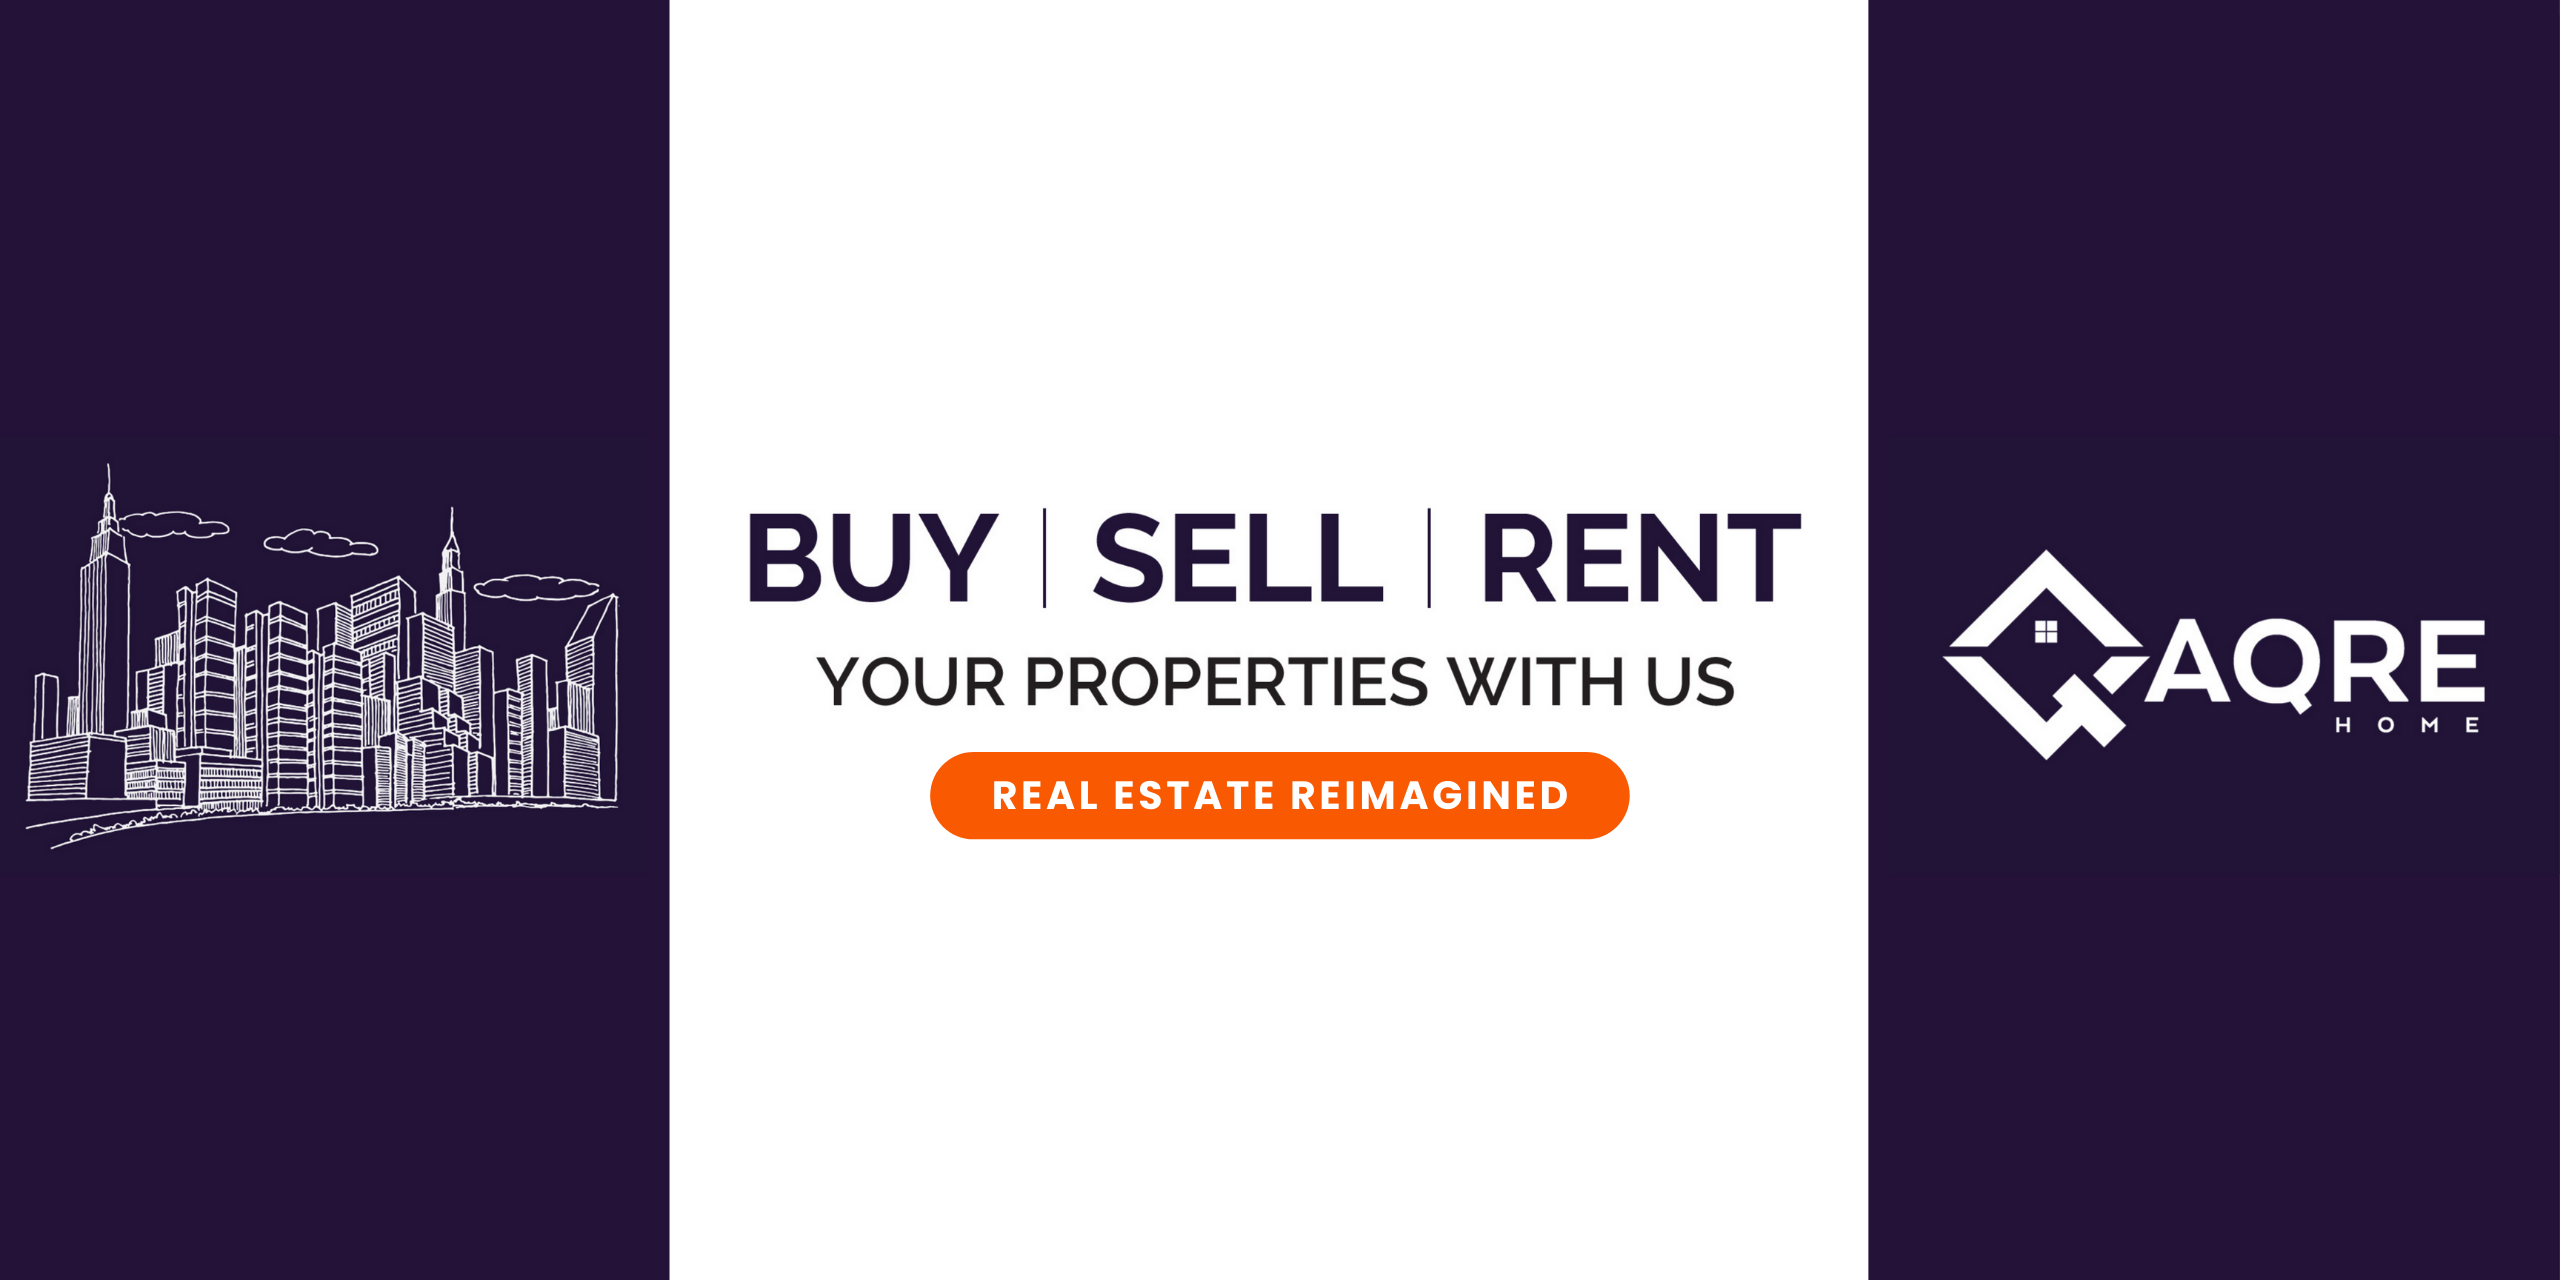 aqre home - buy, sell, rent your properties with us